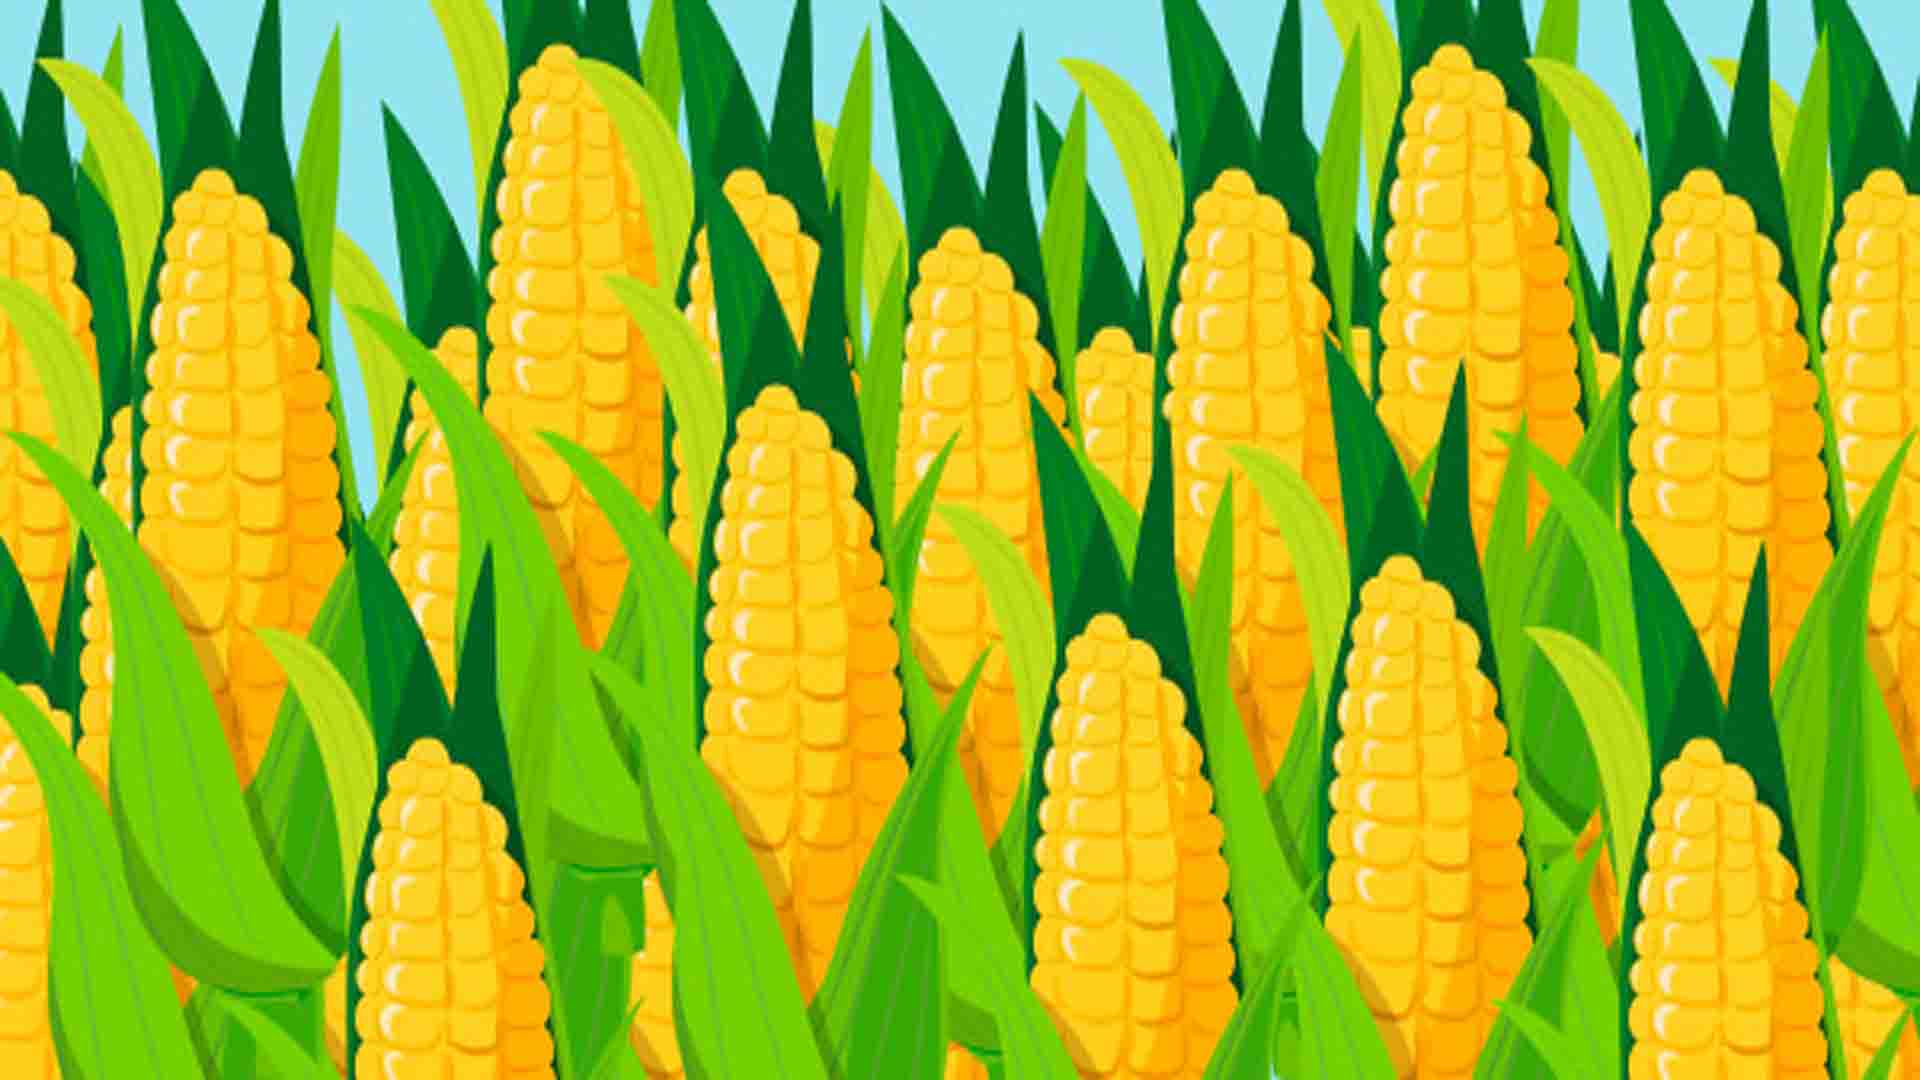 The legend of corn a short stories for kids